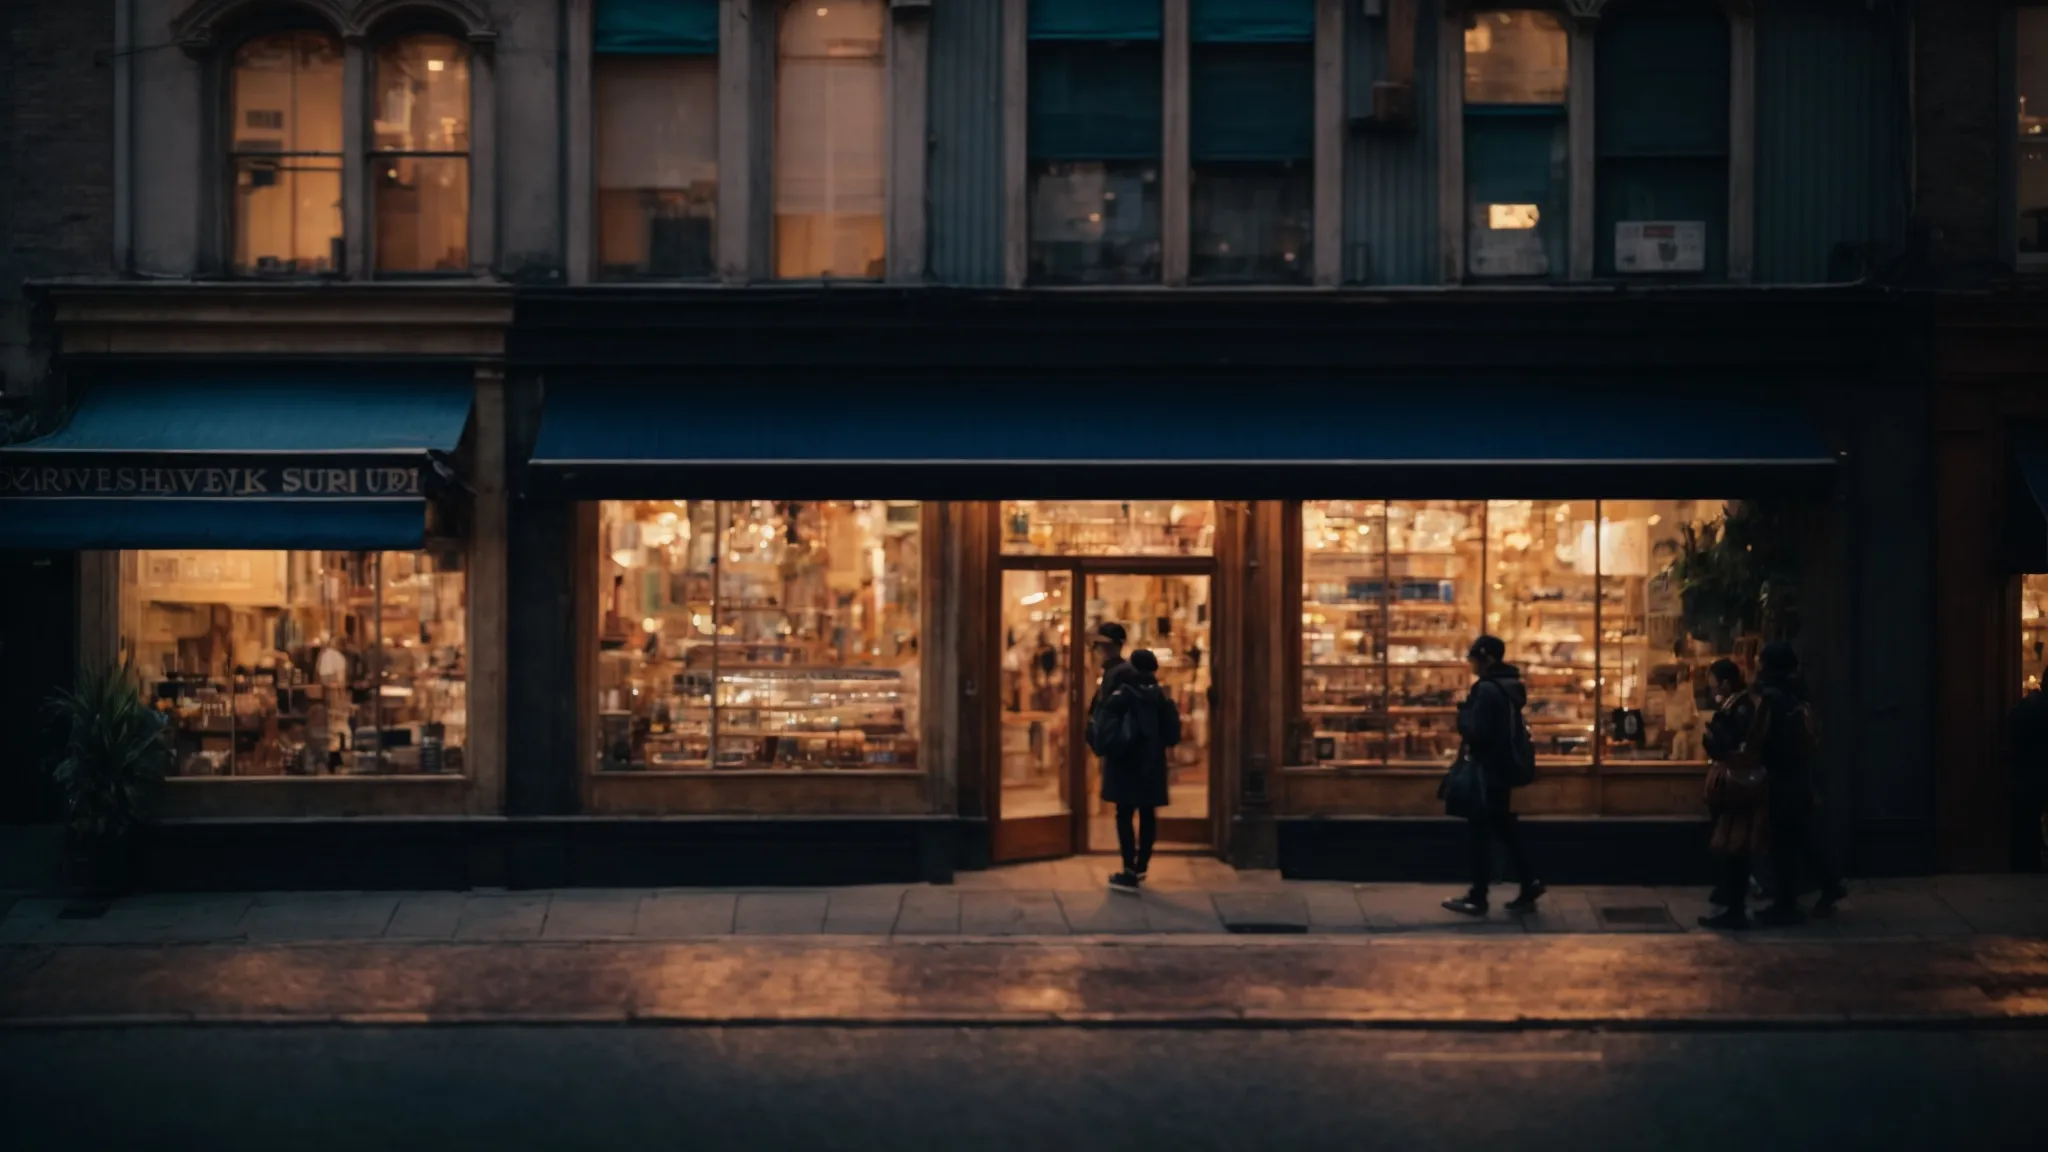 a glowing storefront on a bustling city street shines brightly at dusk, drawing the eyes of passersby amidst numerous other shops.